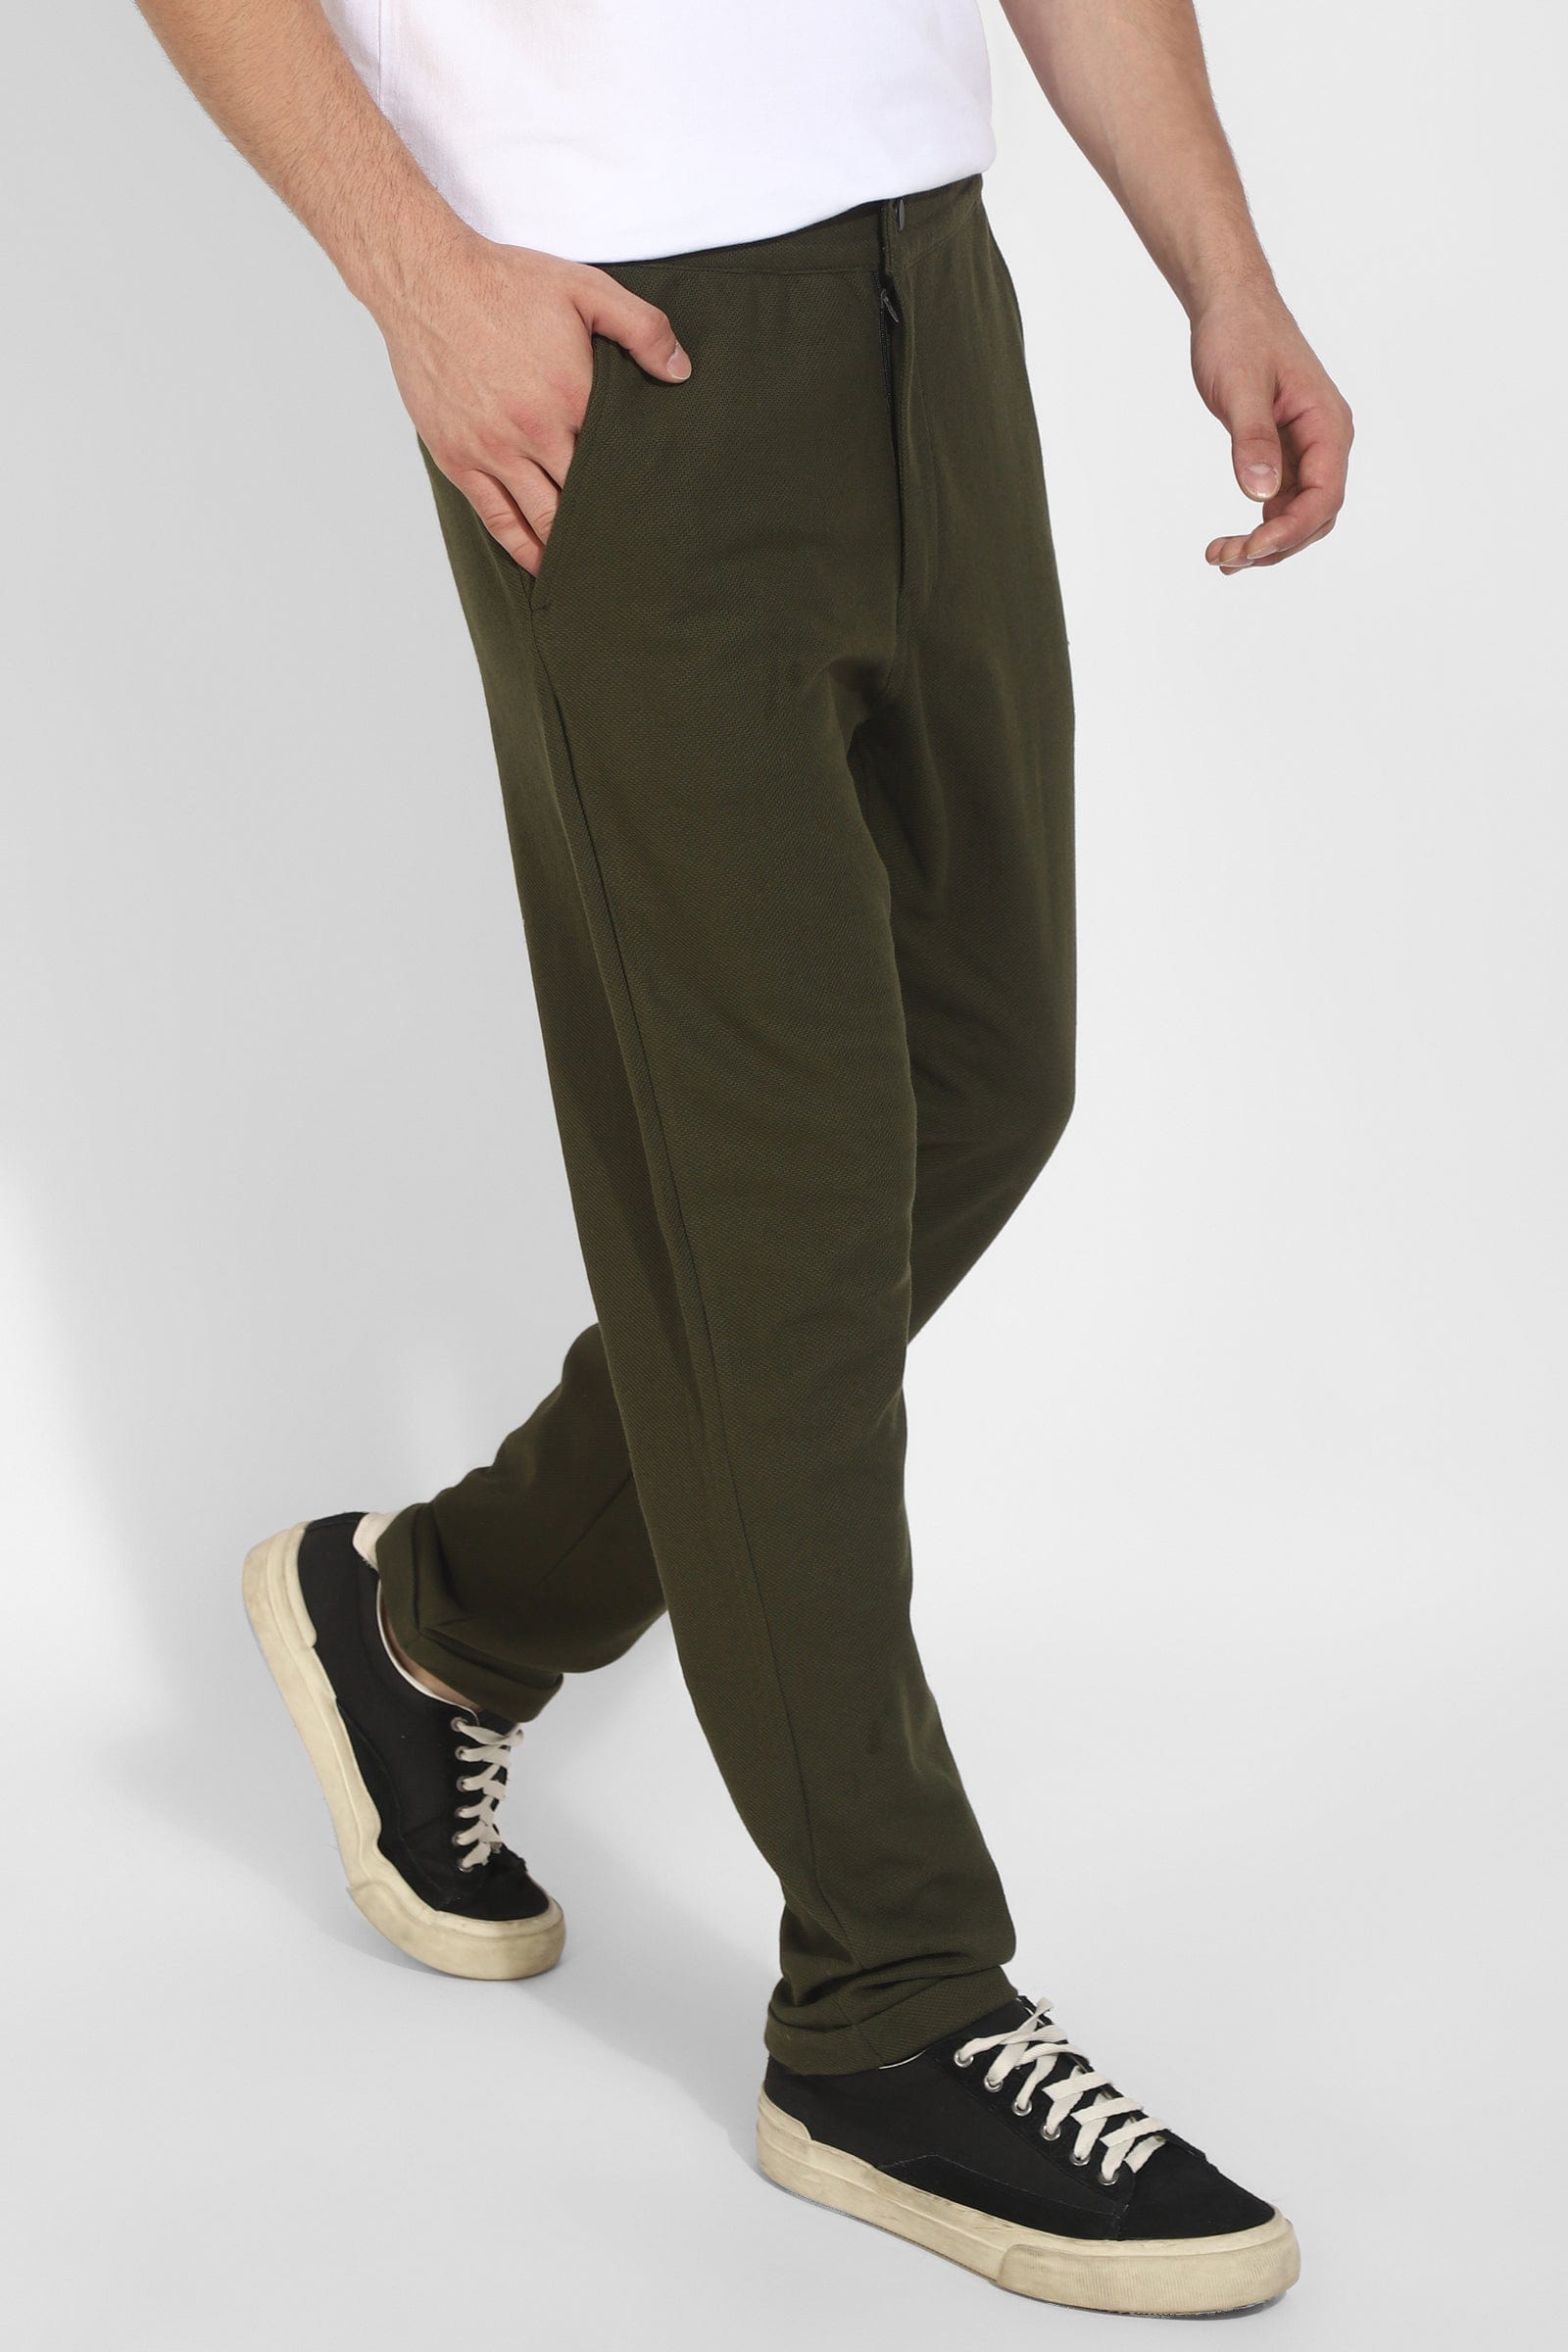 Dark Olive Knitted Trousers By Purple Mango